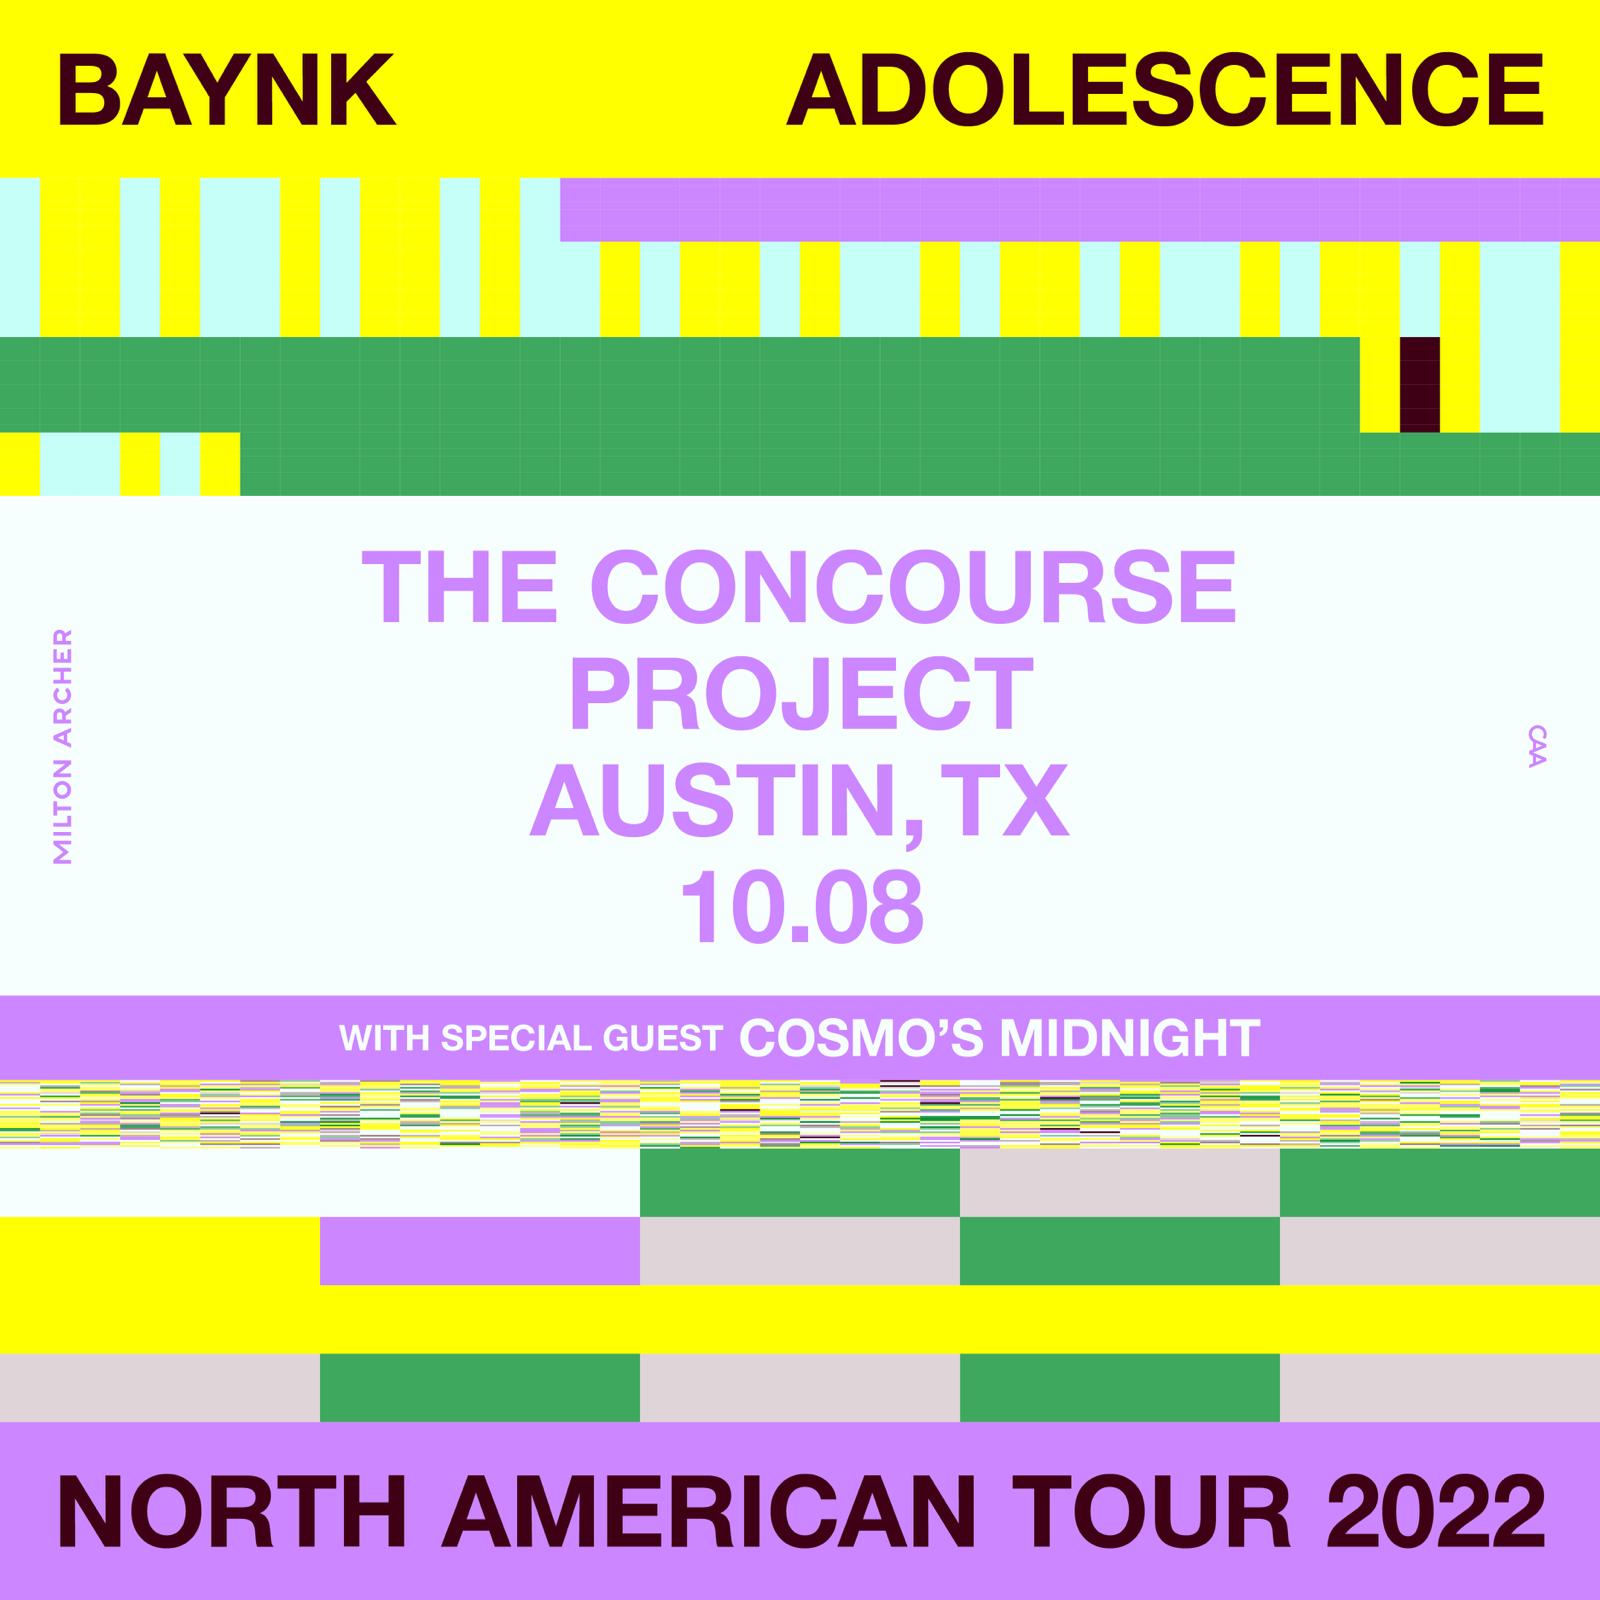 BAYNK w/ Cosmo’s Midnight at The Concourse Project